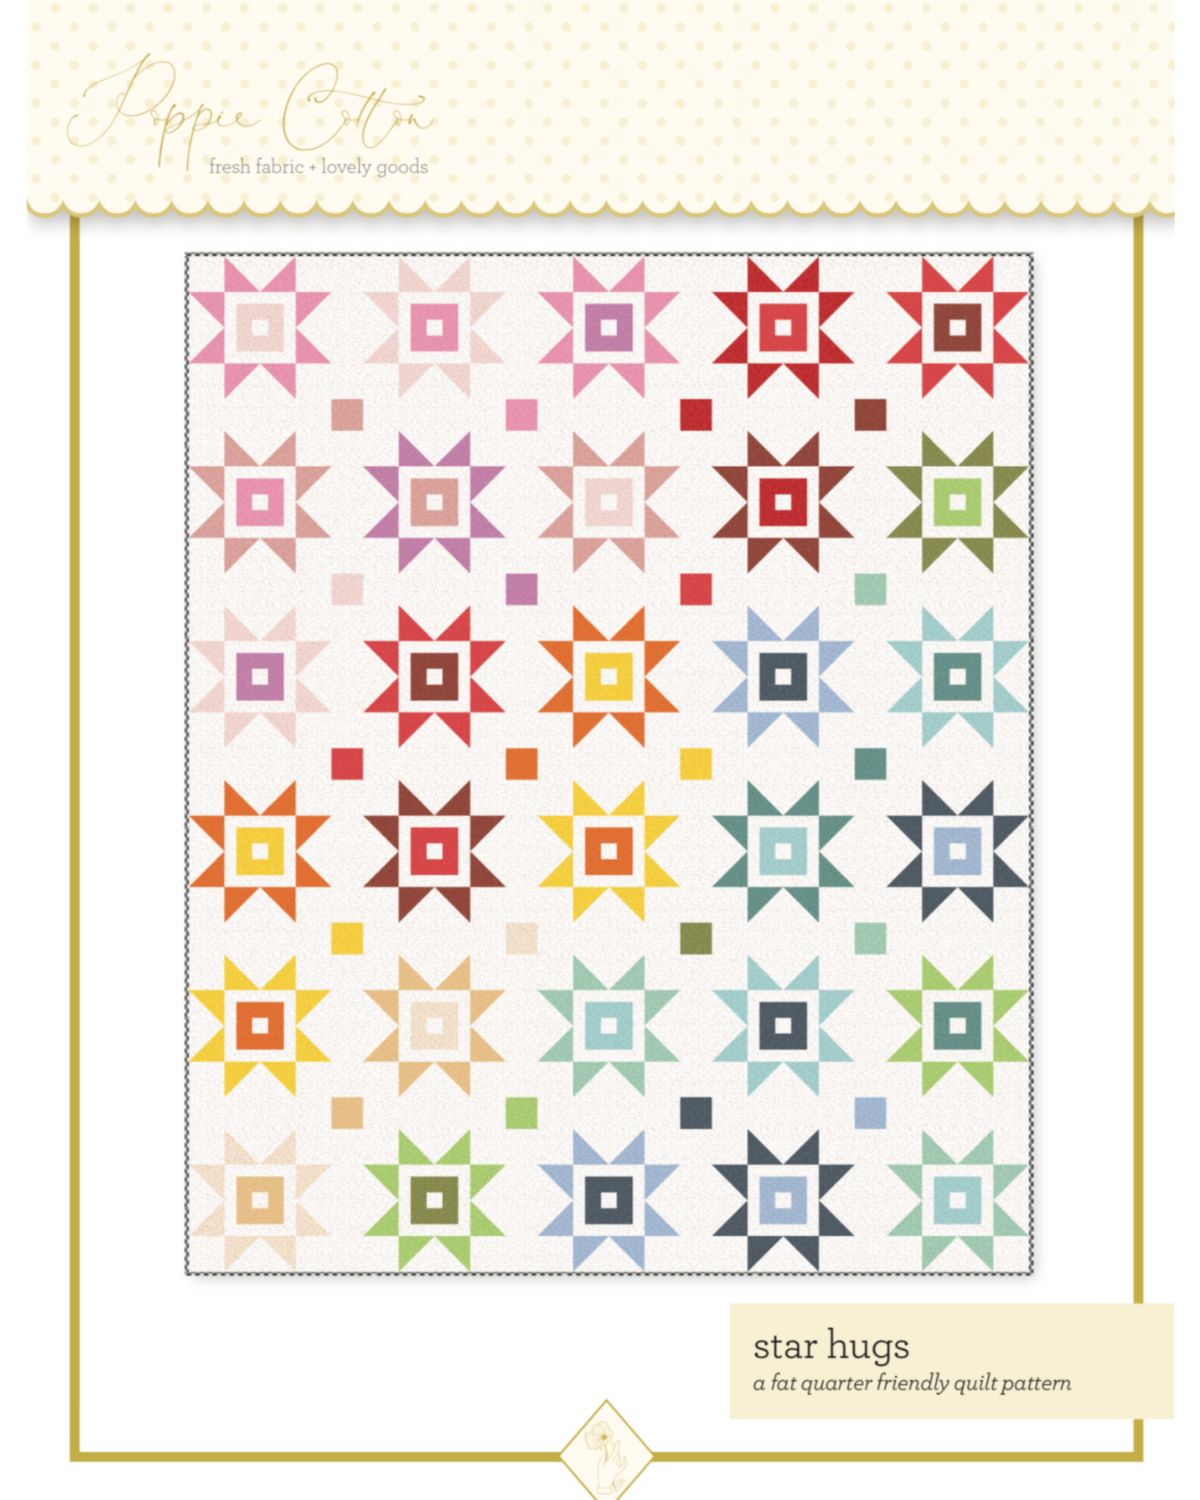 Star Hugs Quilt Pattern, for the Country Confetti Basics Collection - Good Vibes Quilt Shop